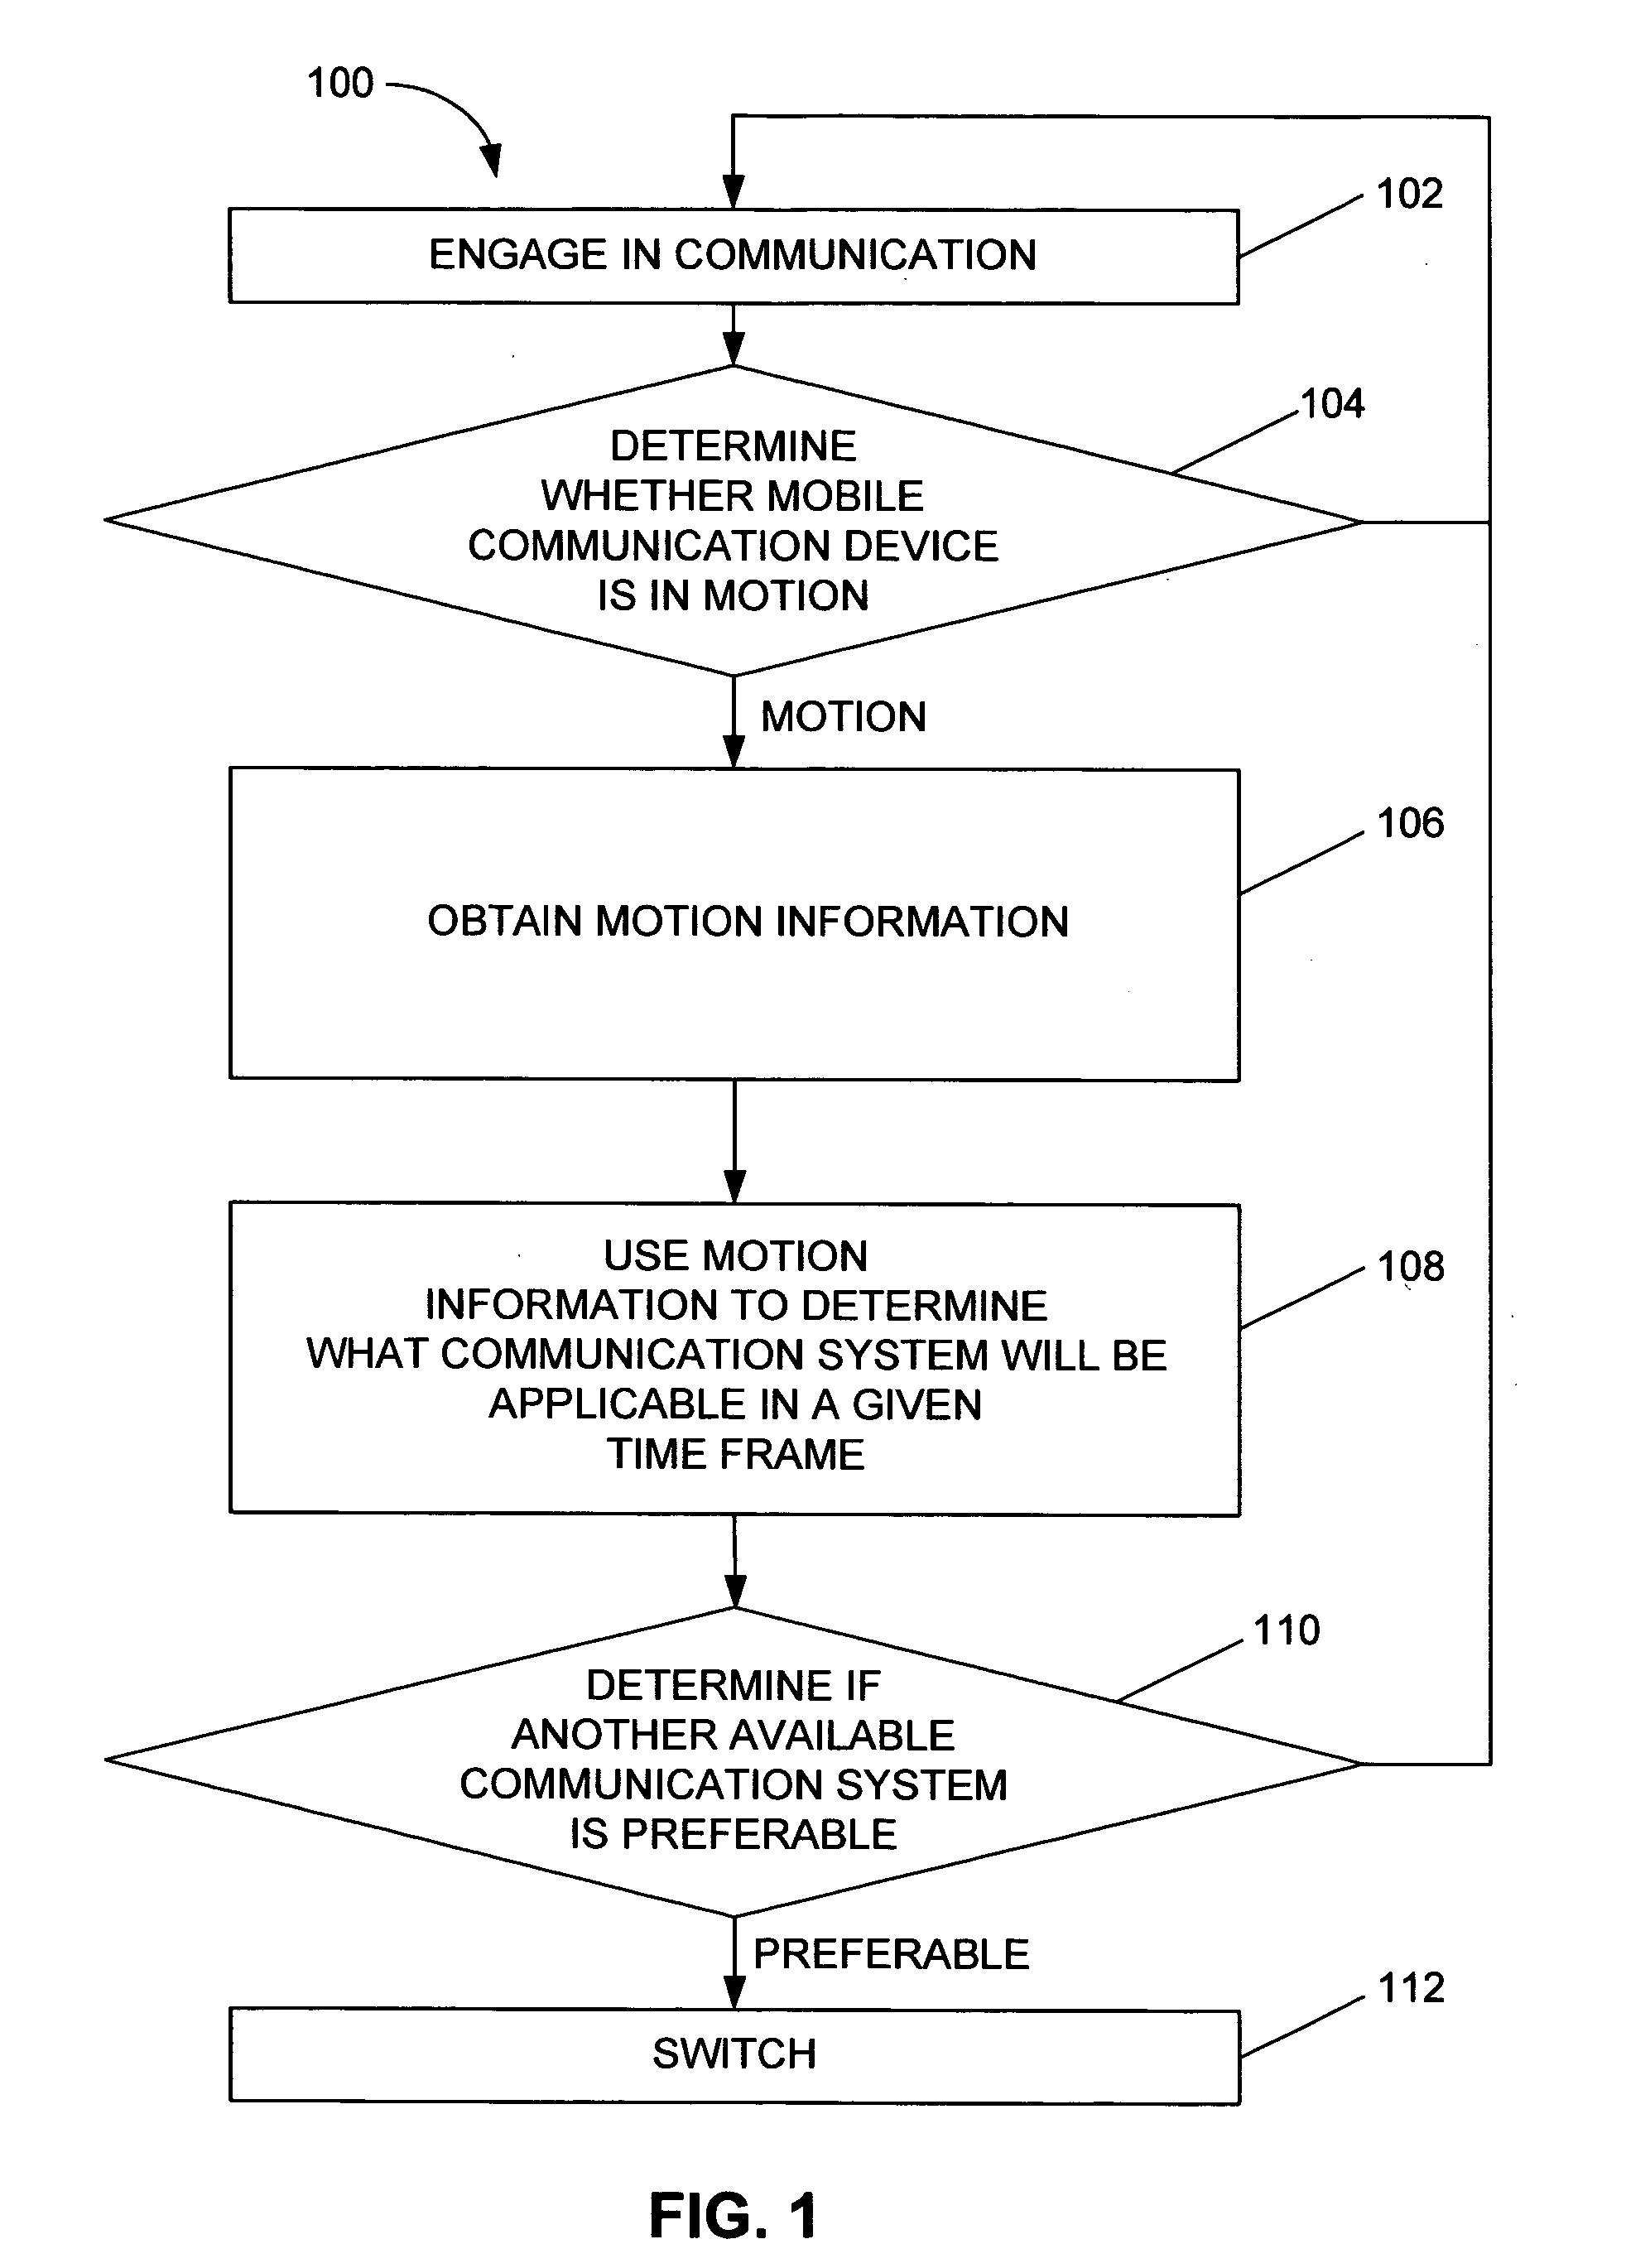 Systems and methods for motion sensitive roaming in a mobile communication device